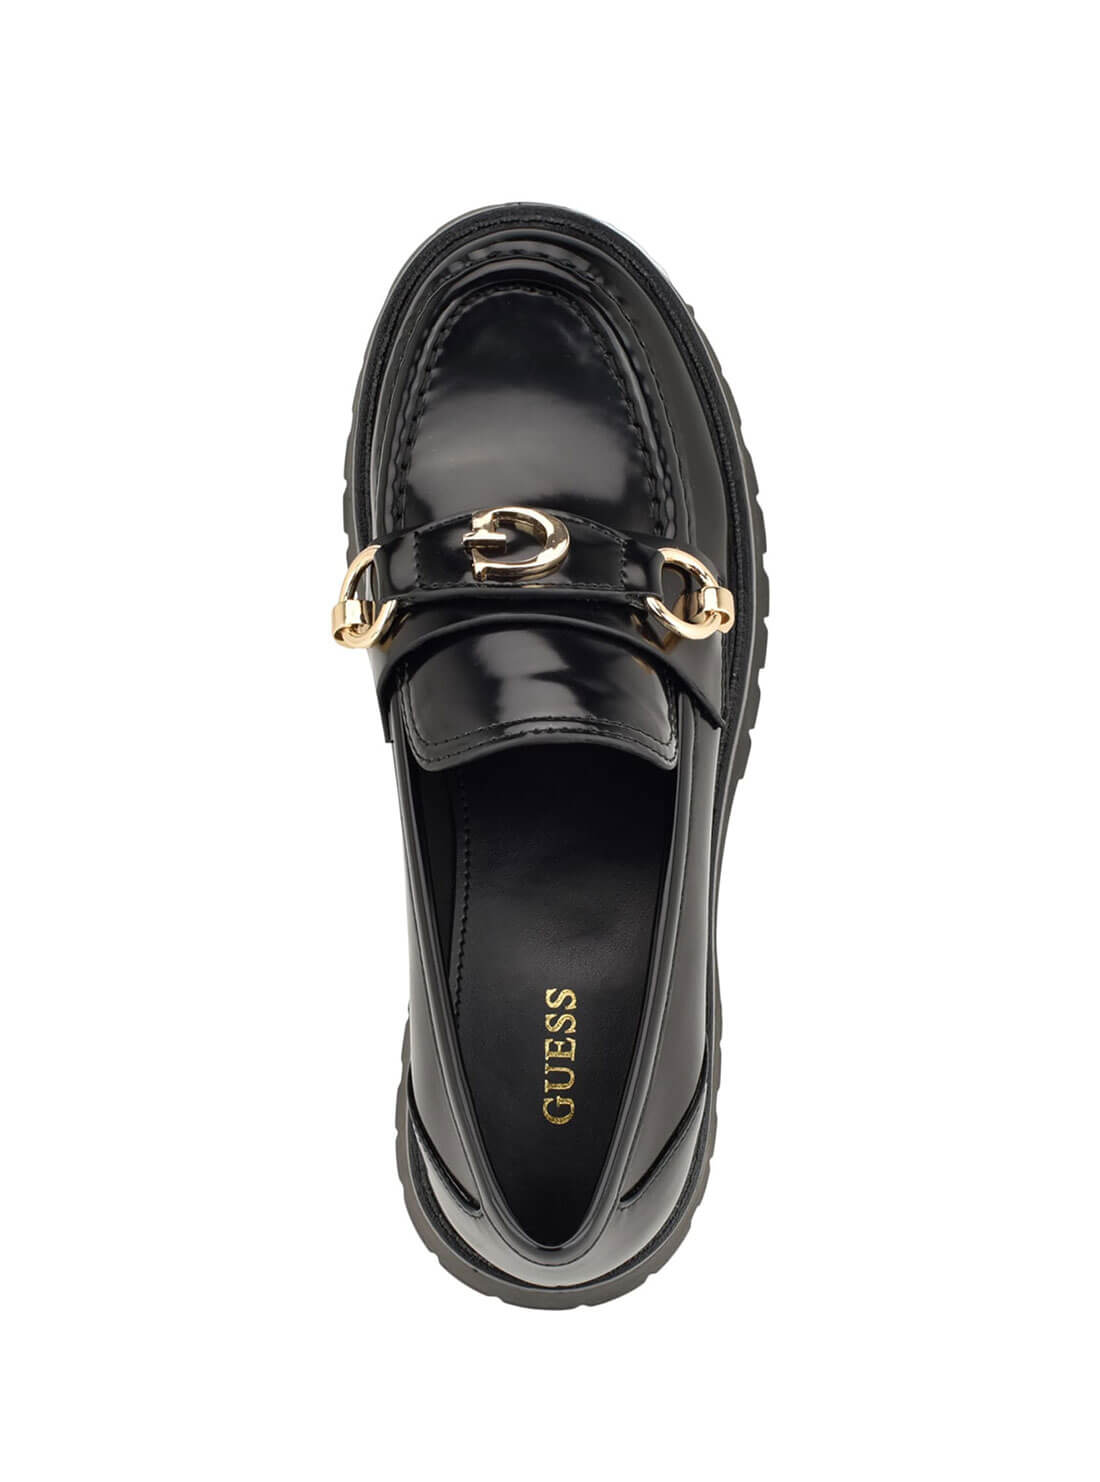 Black Almost Loafers | GUESS Women's Shoes | top view